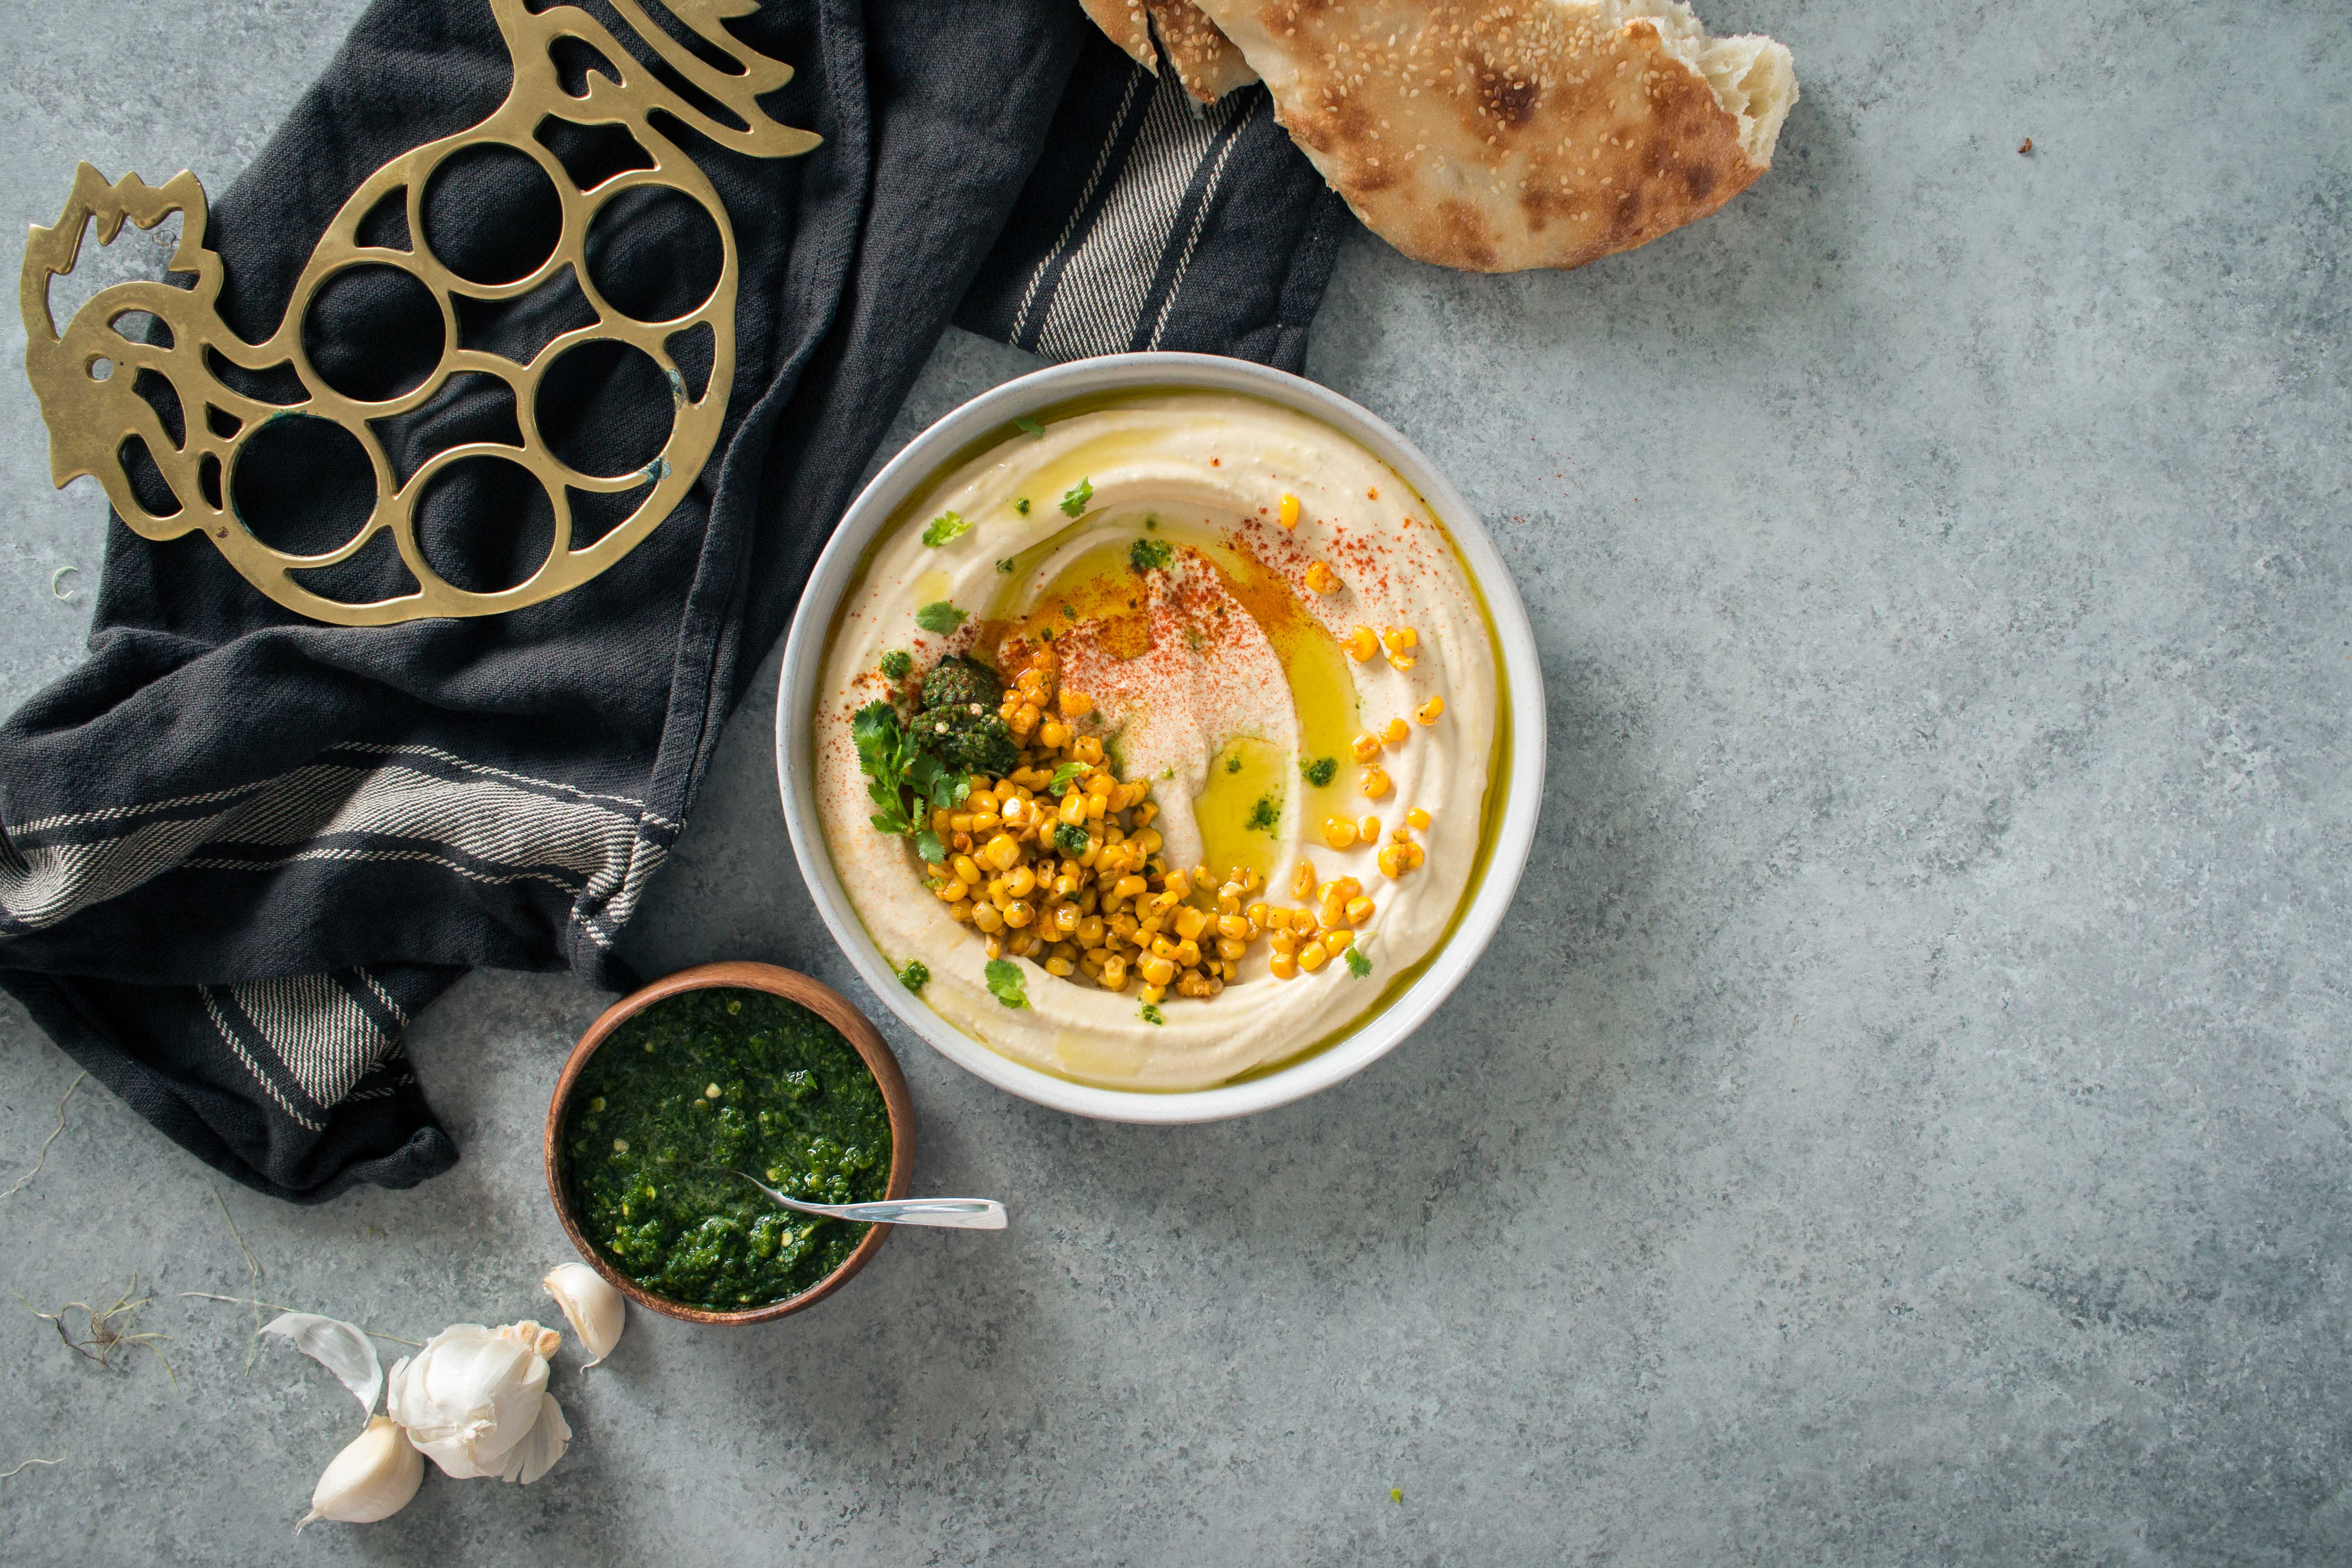 Hummus with Smoked Paprika Corn and Schug |Recipe from I Will Not Eat Oysters